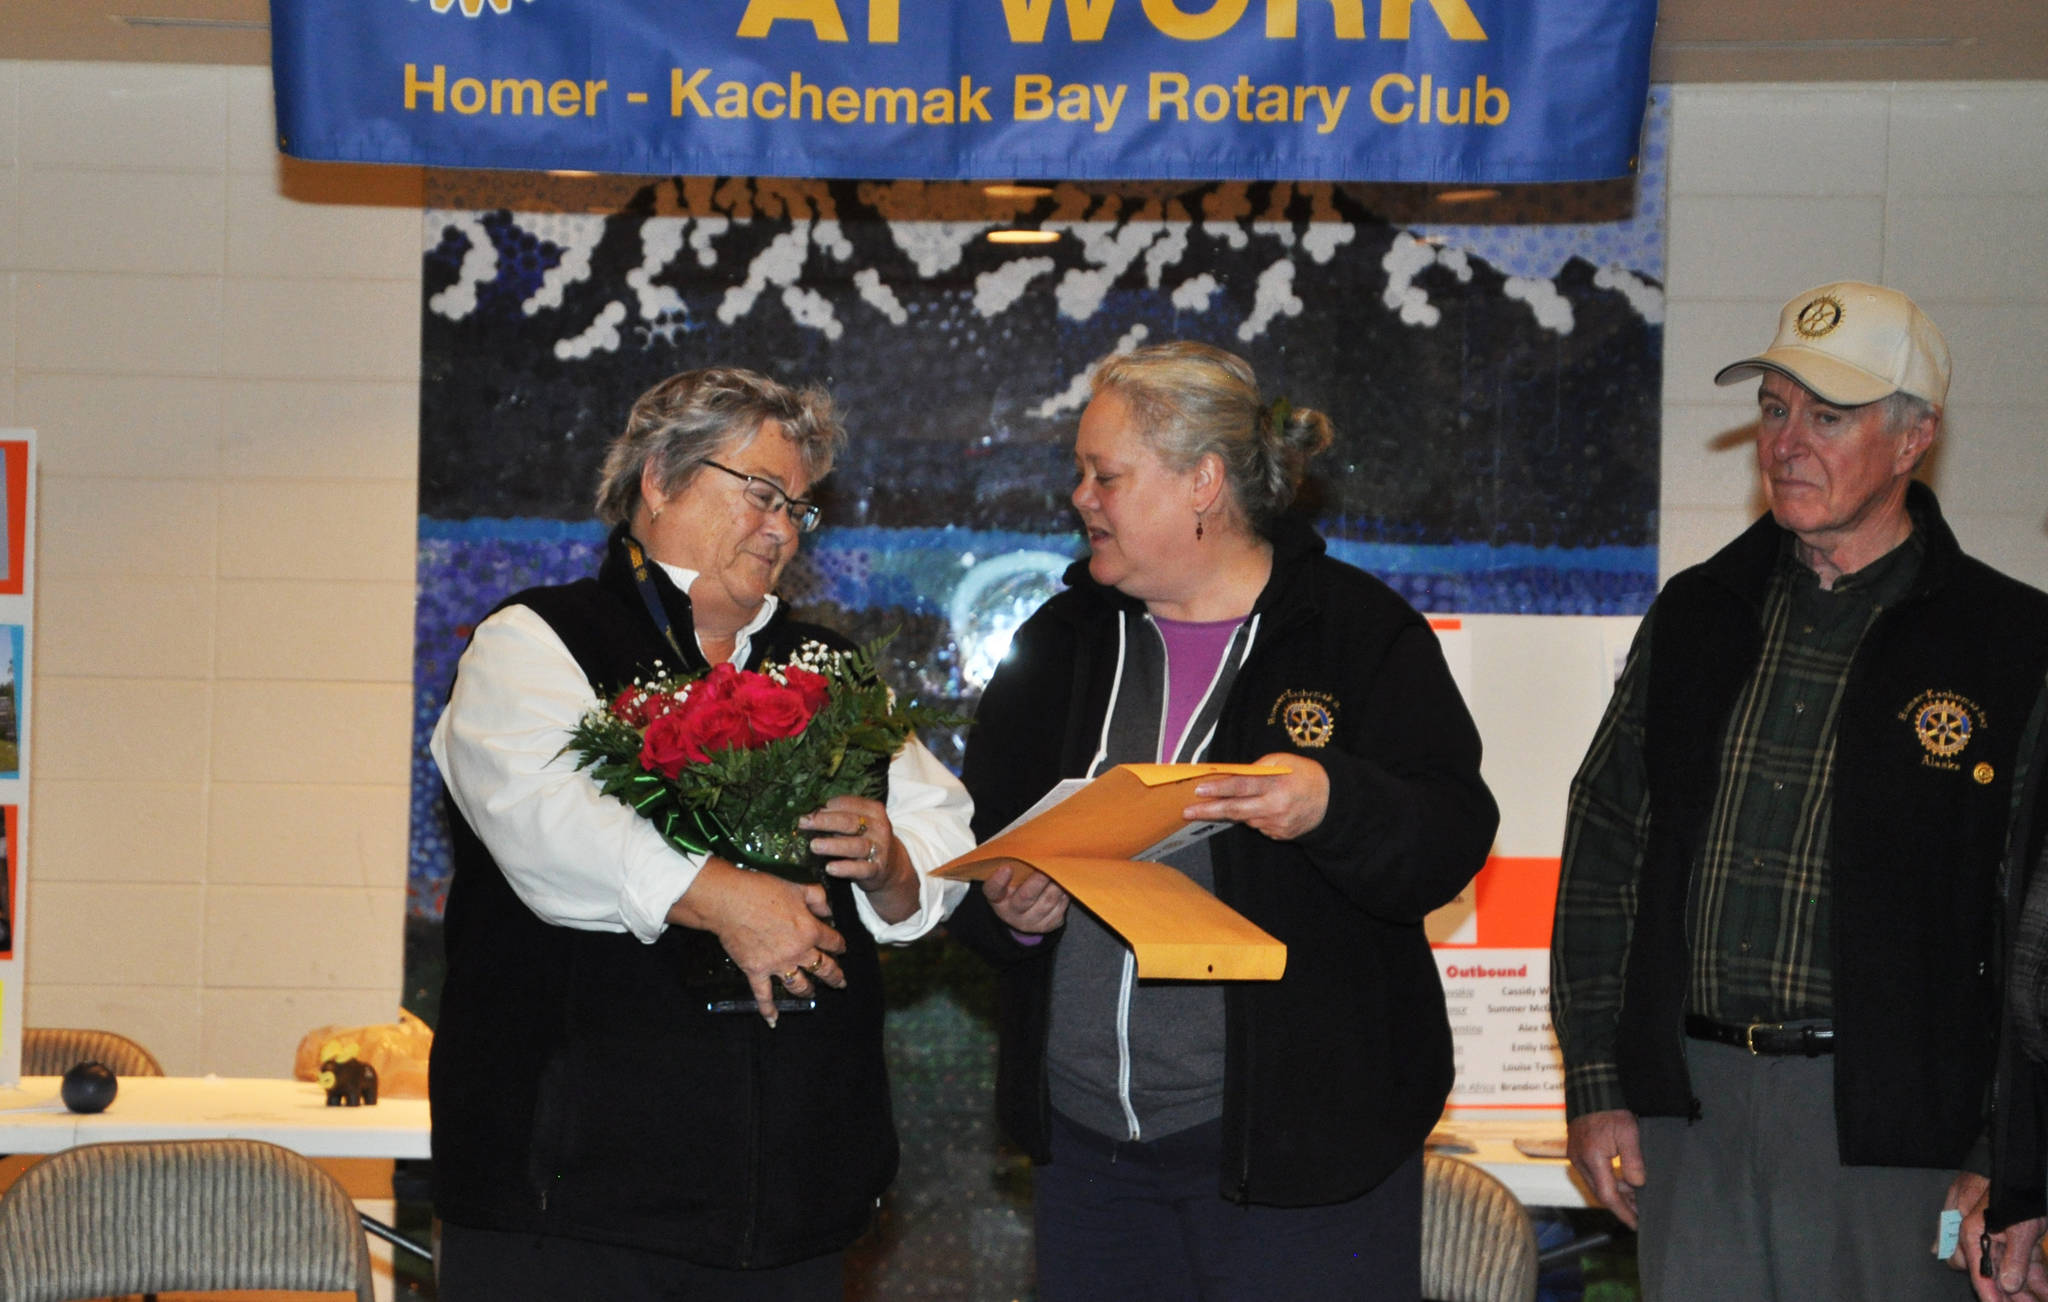 Sharon Minsch, left, accepts flowers from Beth Trowbridge, Homer Kachemak Bay Rotary Club President, at this year’s Rotary Health Fair on Saturday, Oct. 28, 2017 at Homer High School in Homer, Alaska. (Photo submitted)